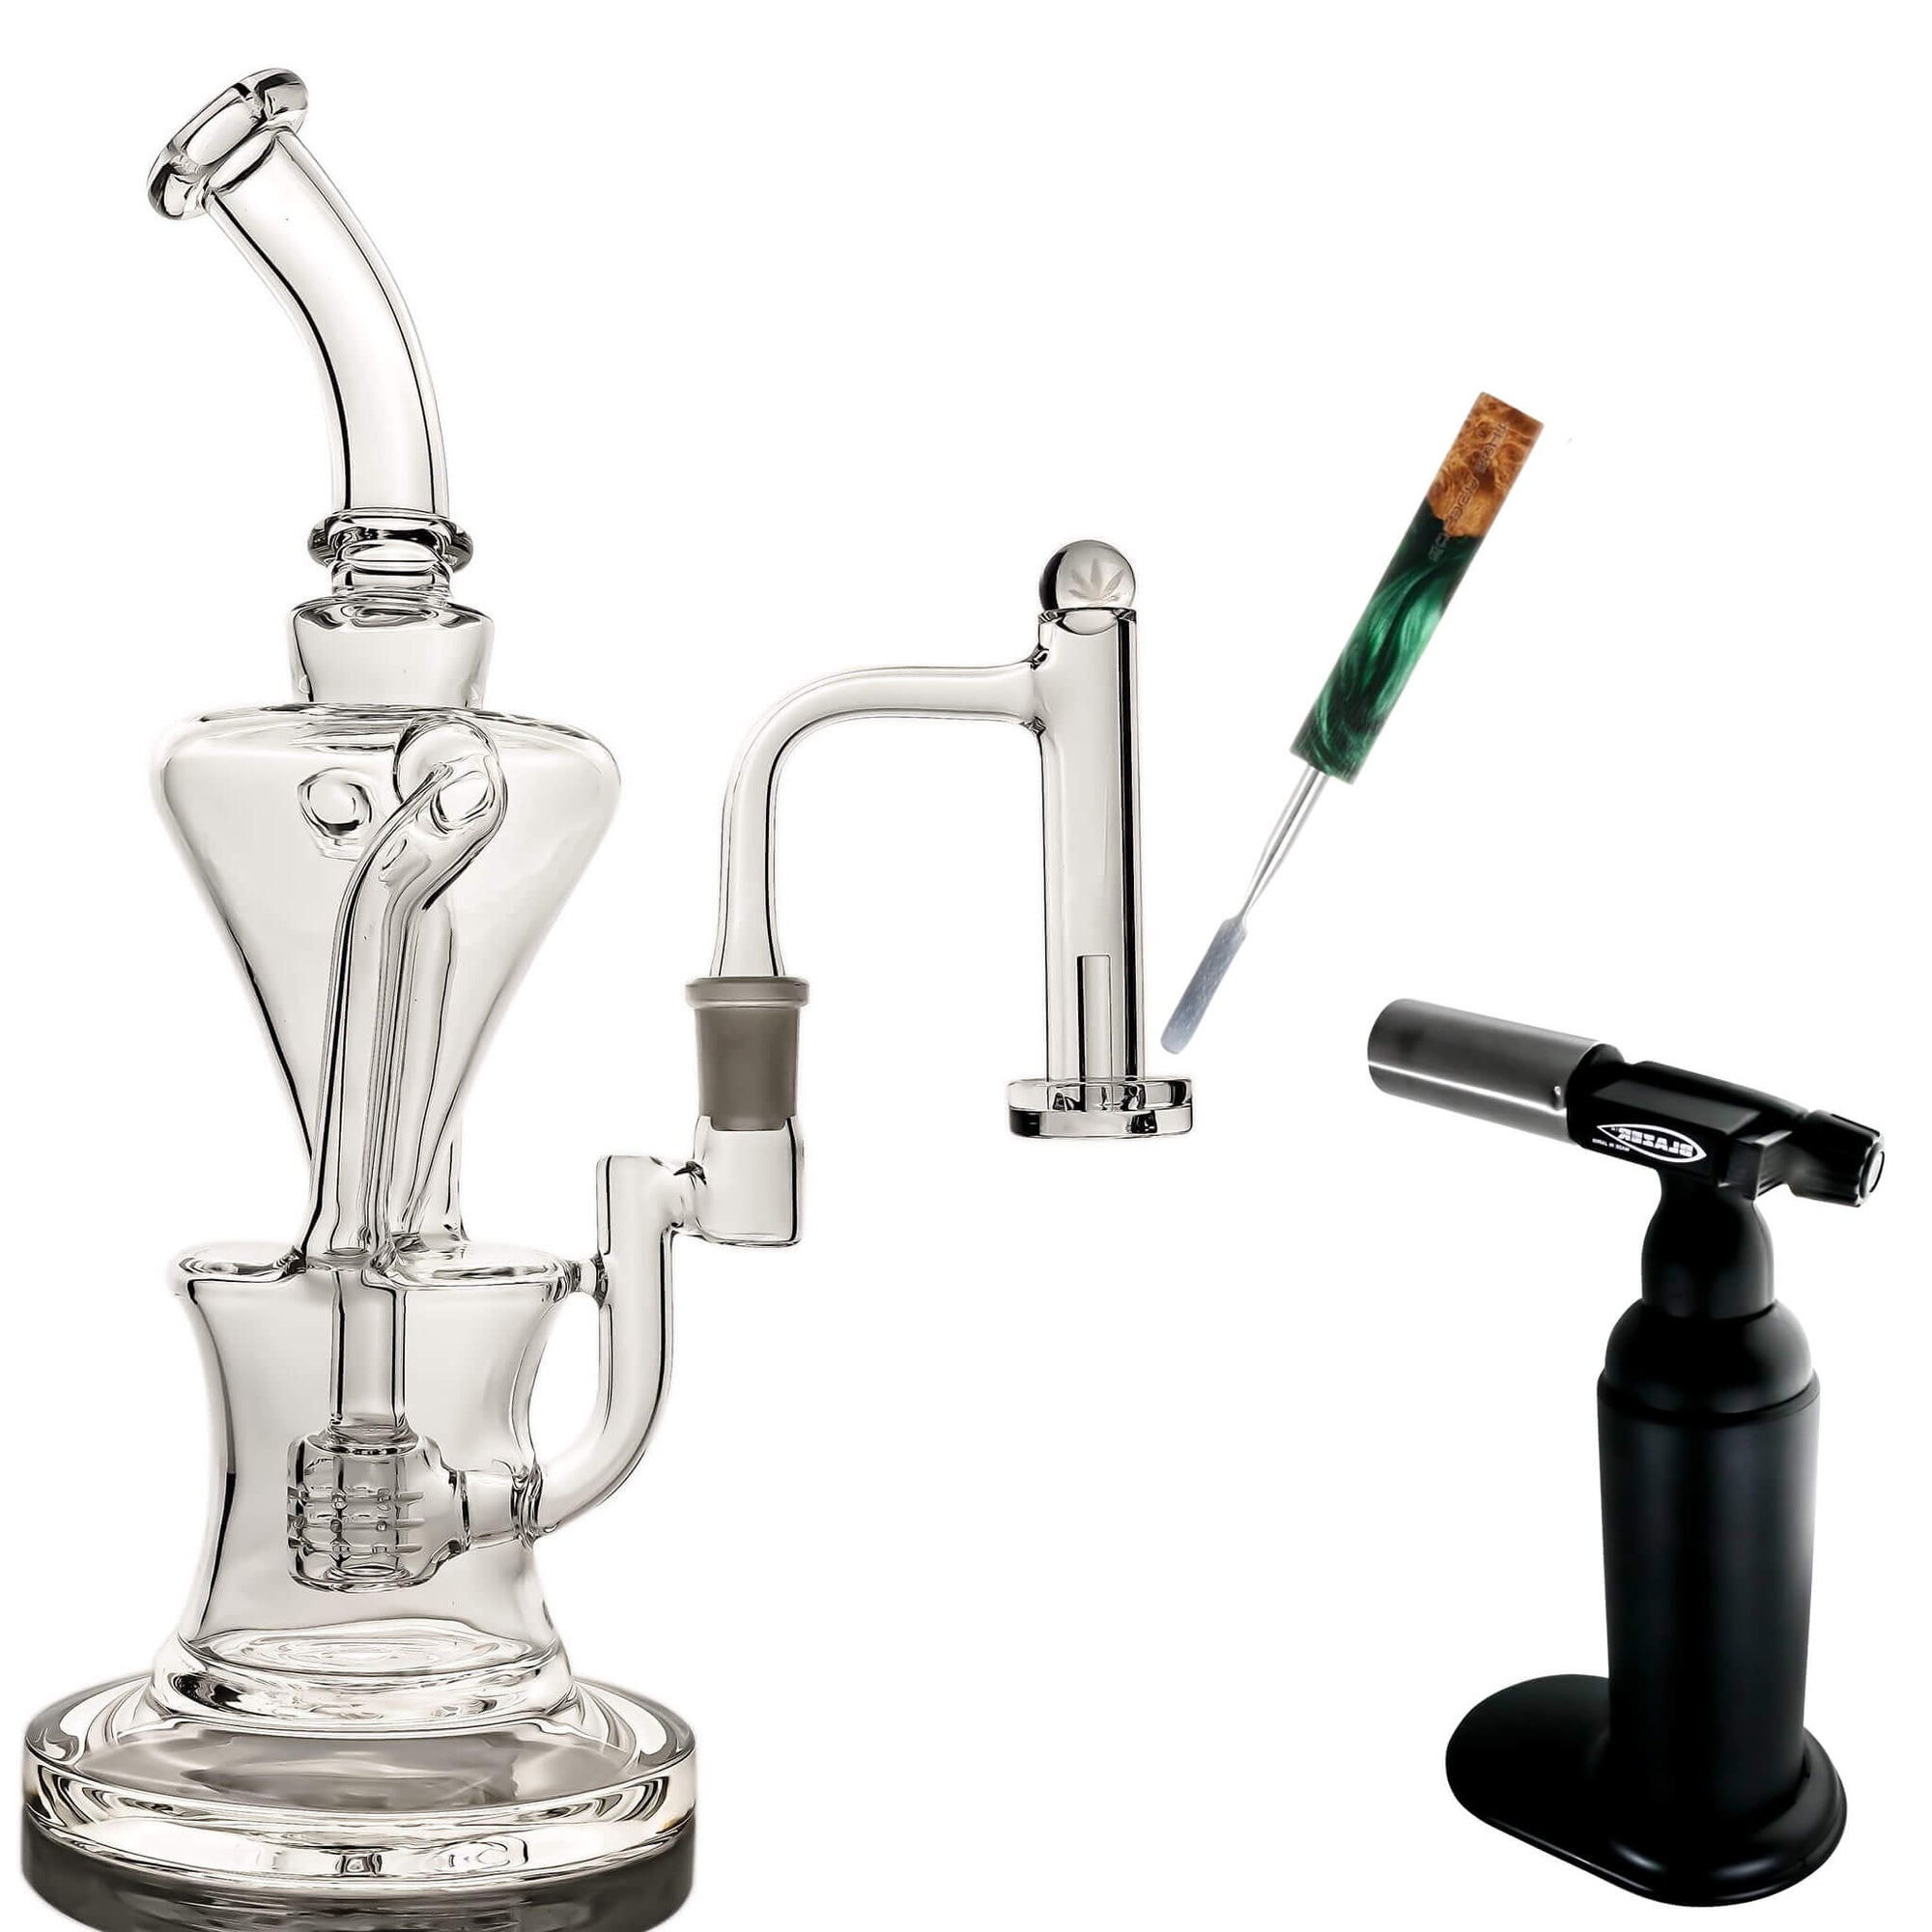 Complete Torch Dabbing Kit View-The Five Necessary Tools To Take A Proper Dab!